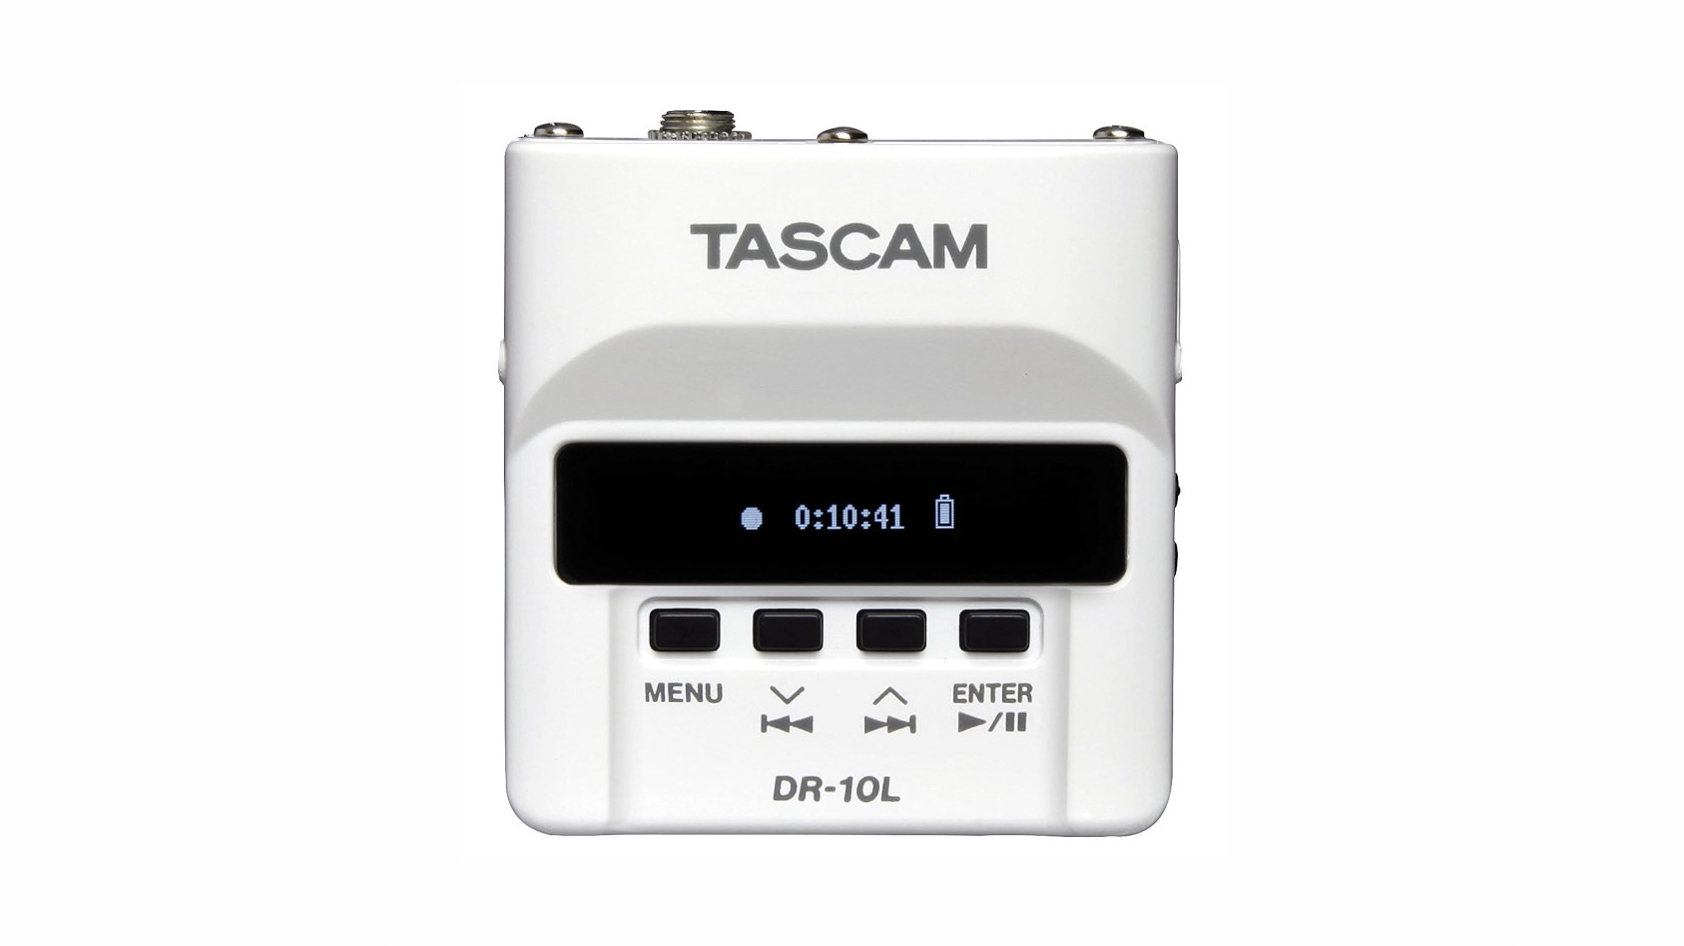 Product image of a white Tascam DR-10L digital recorder in front of a white background